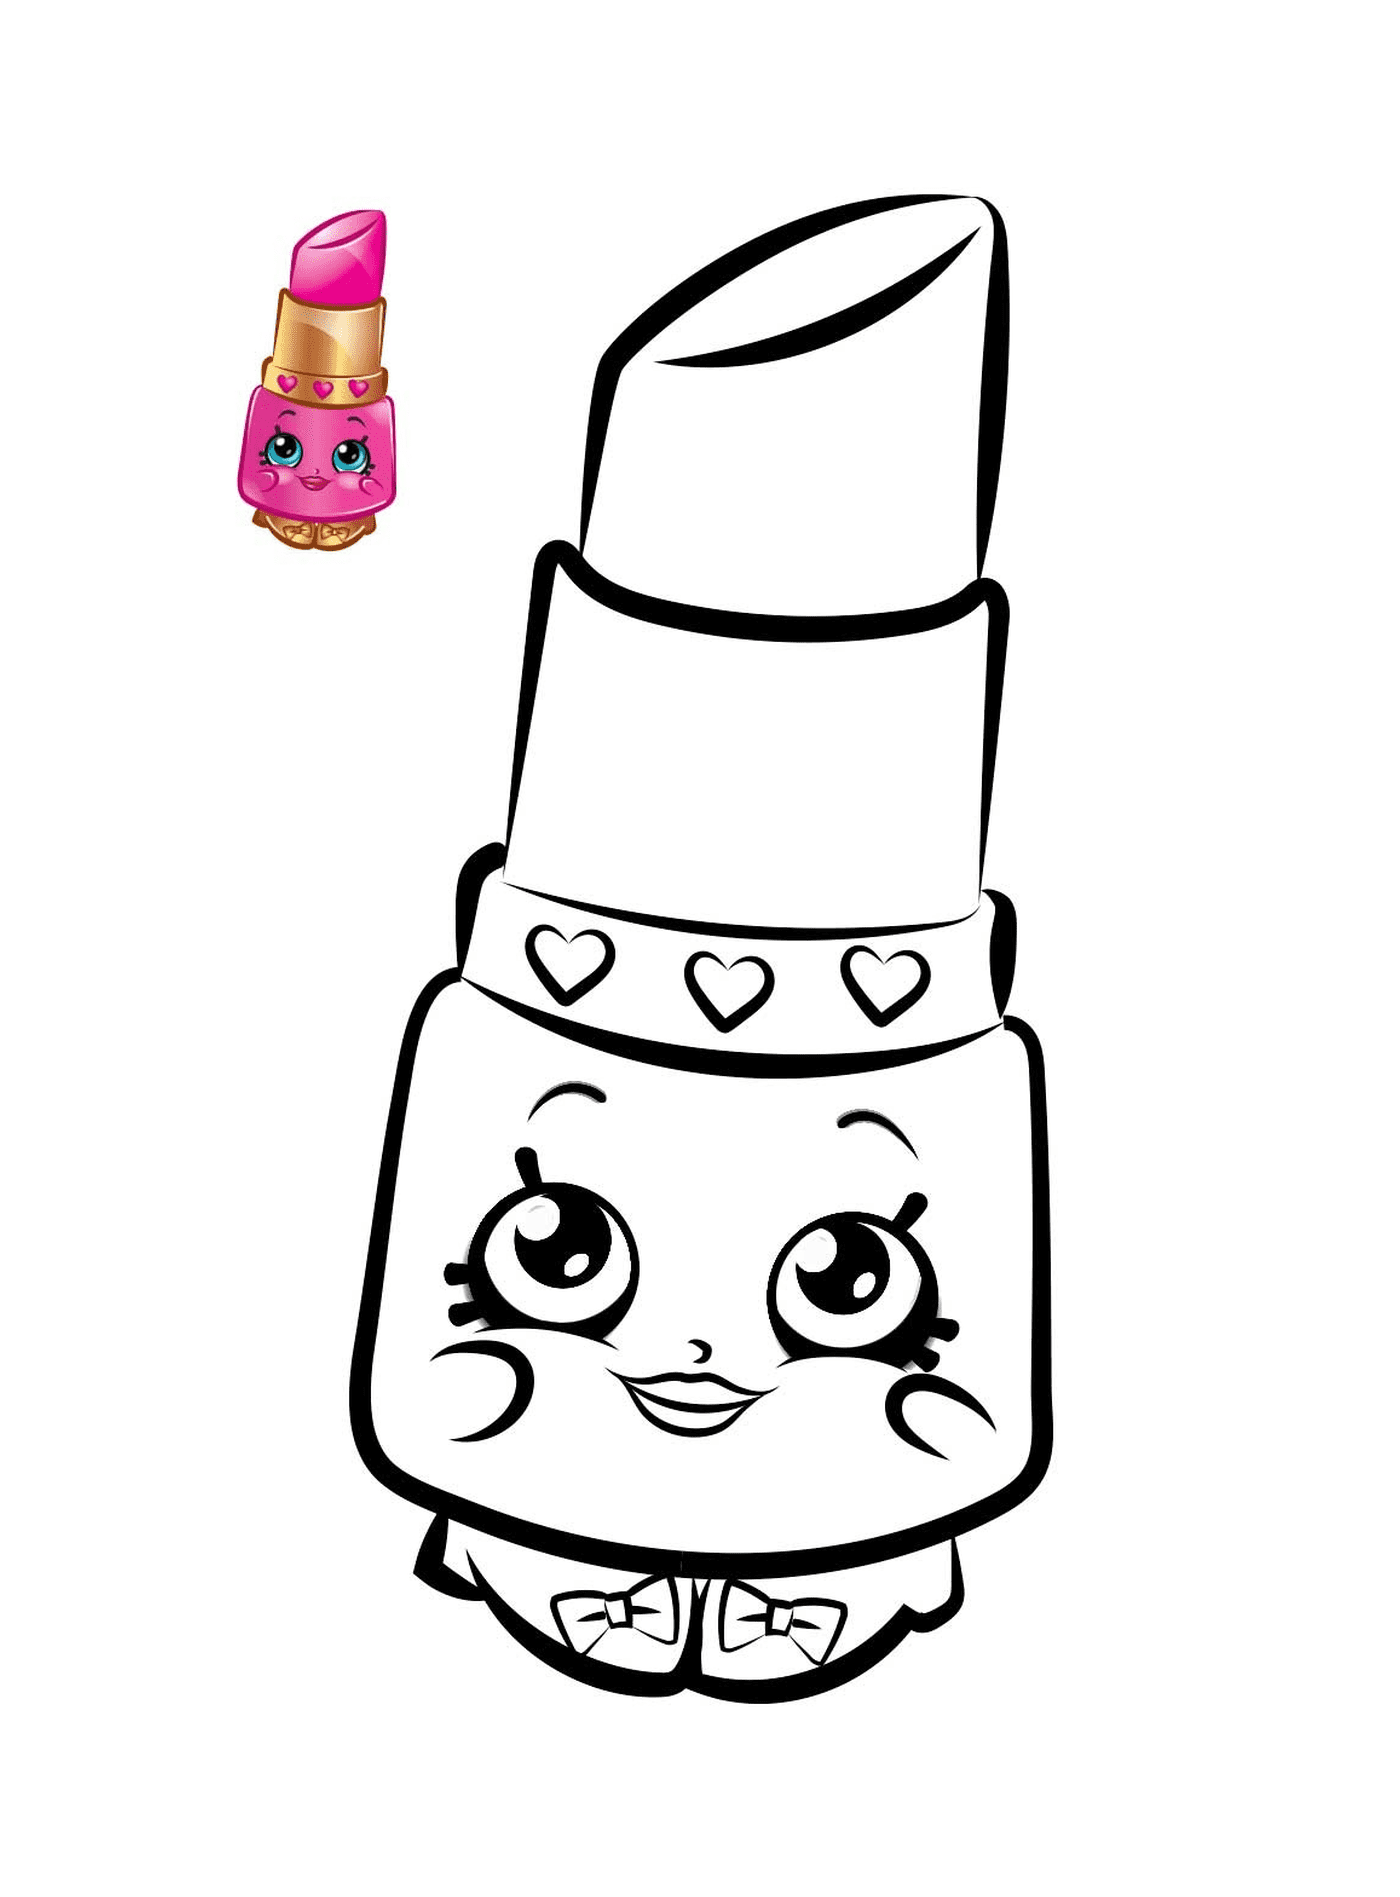  Shopkins Lip RedCity name (optional, probably does not need a translation) 